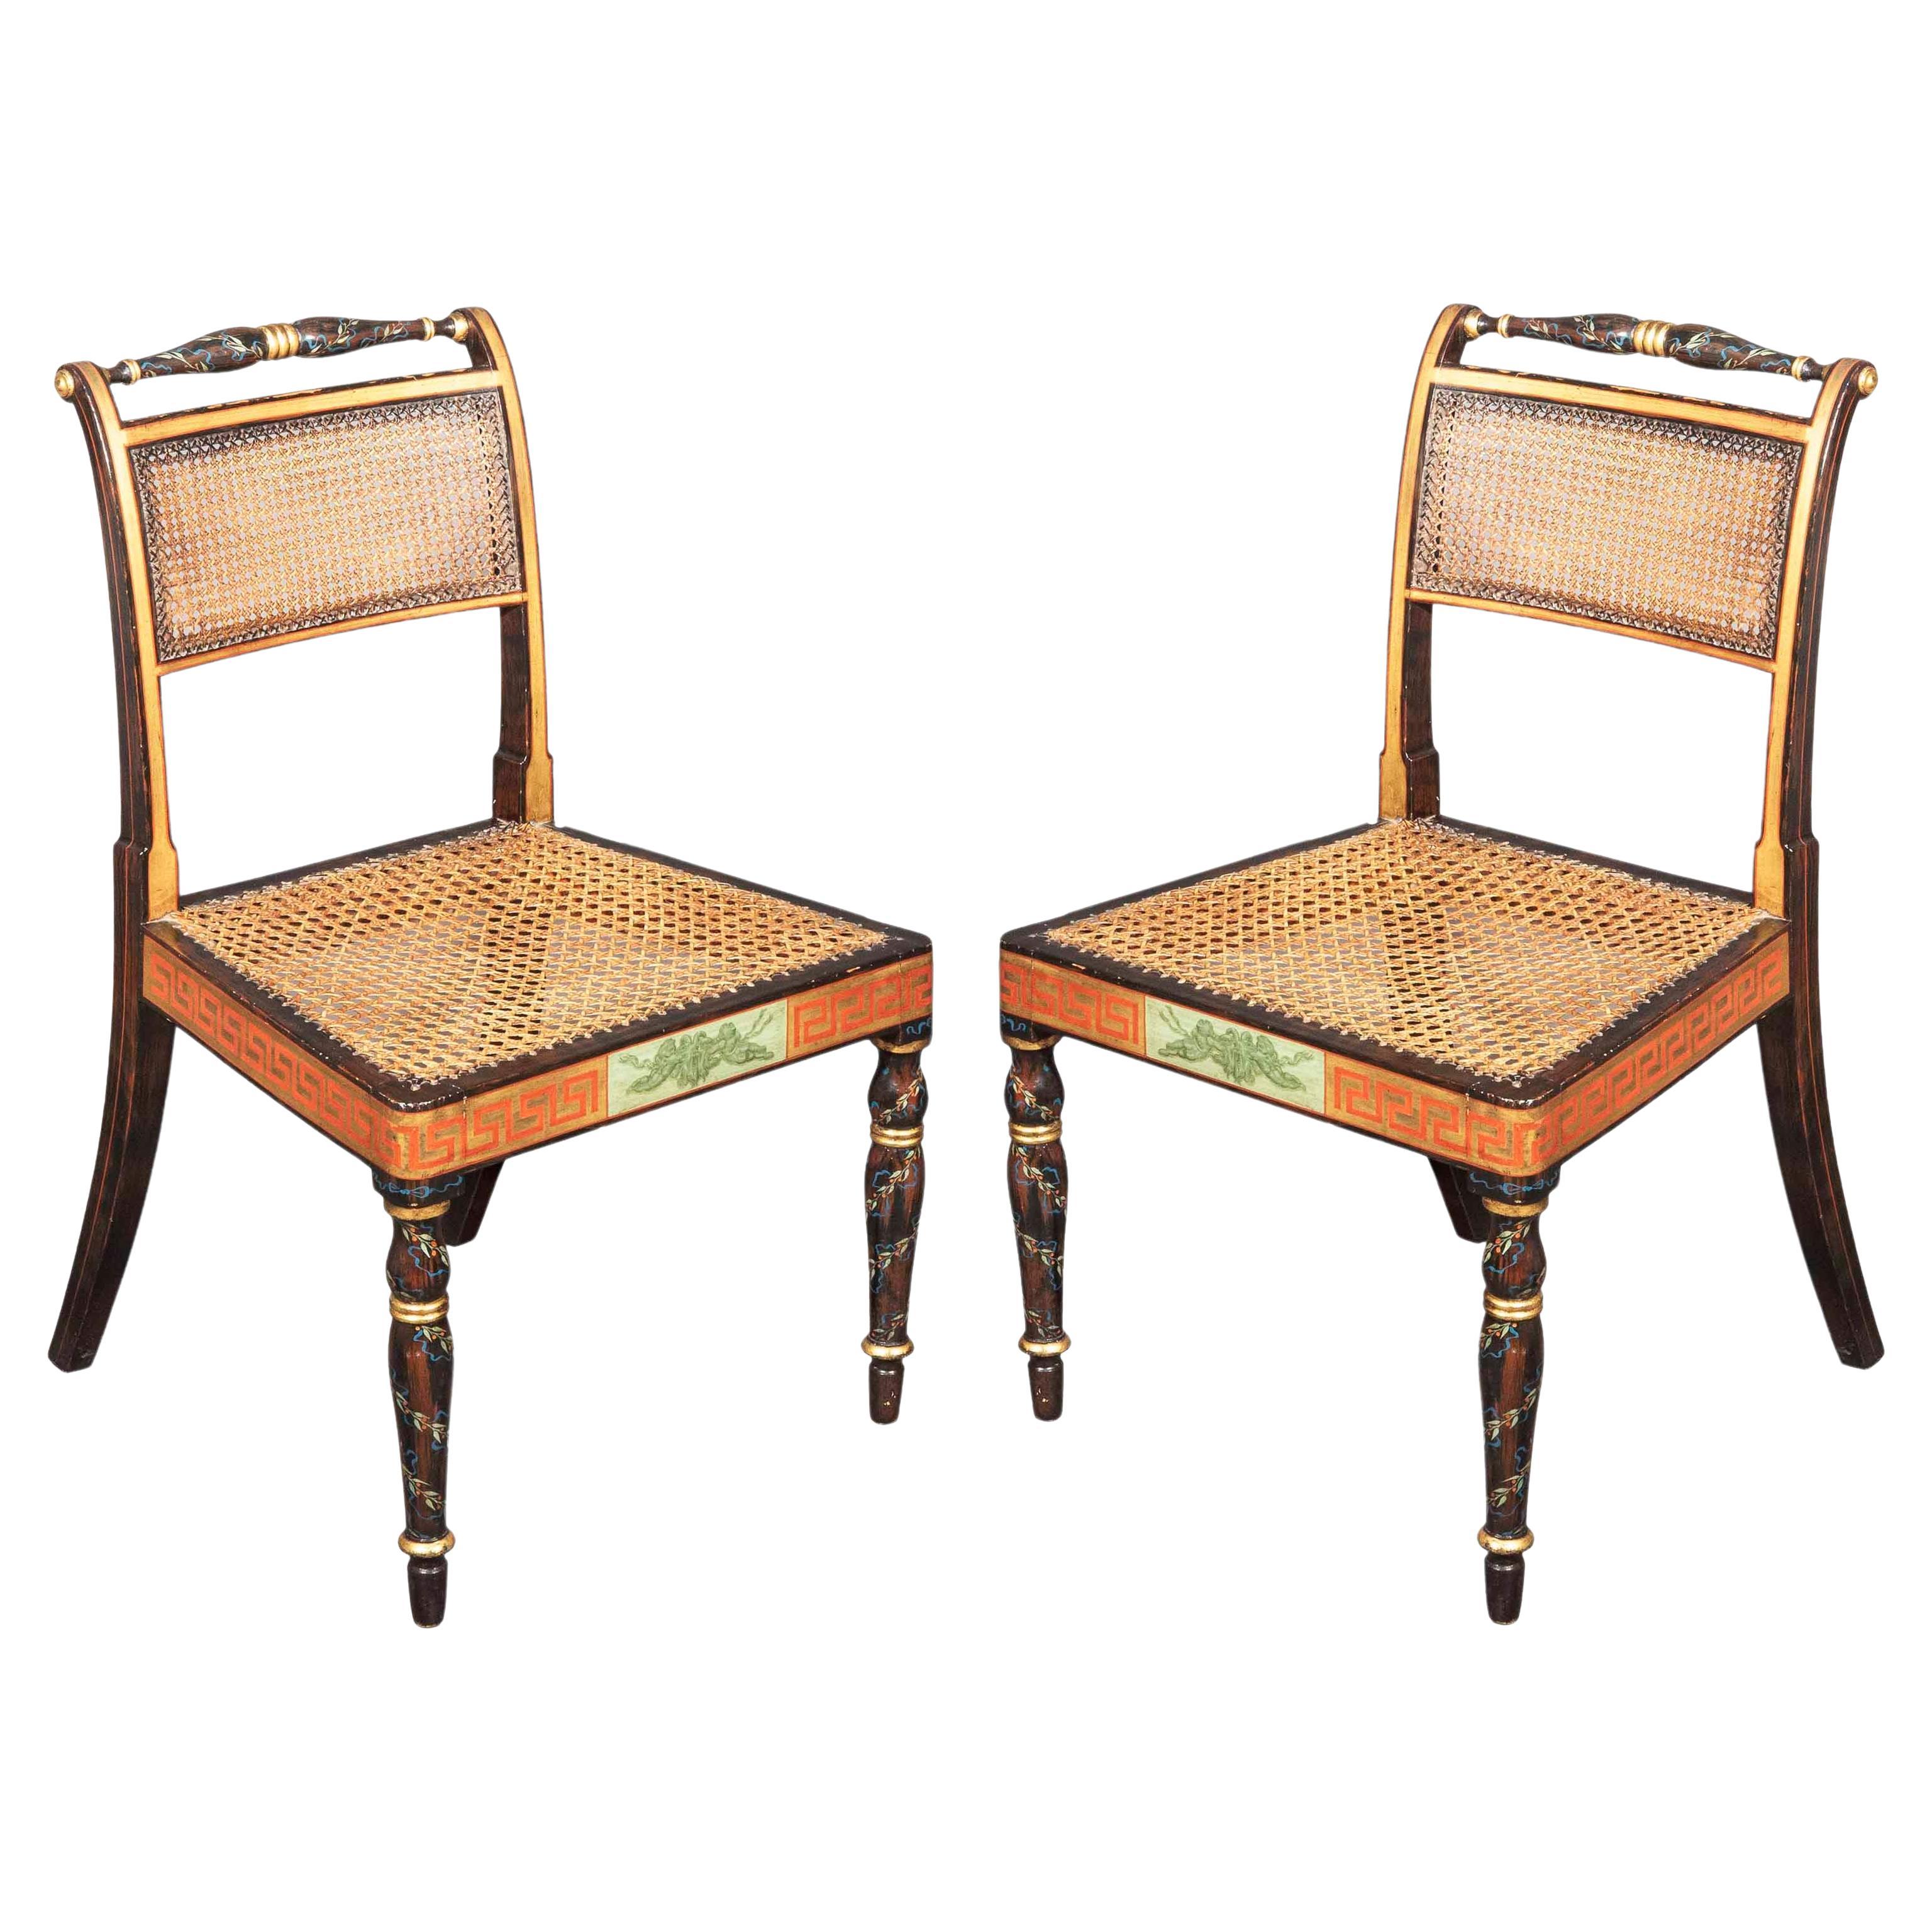 Georgian Regency Painted Chairs, 3 Pairs Available